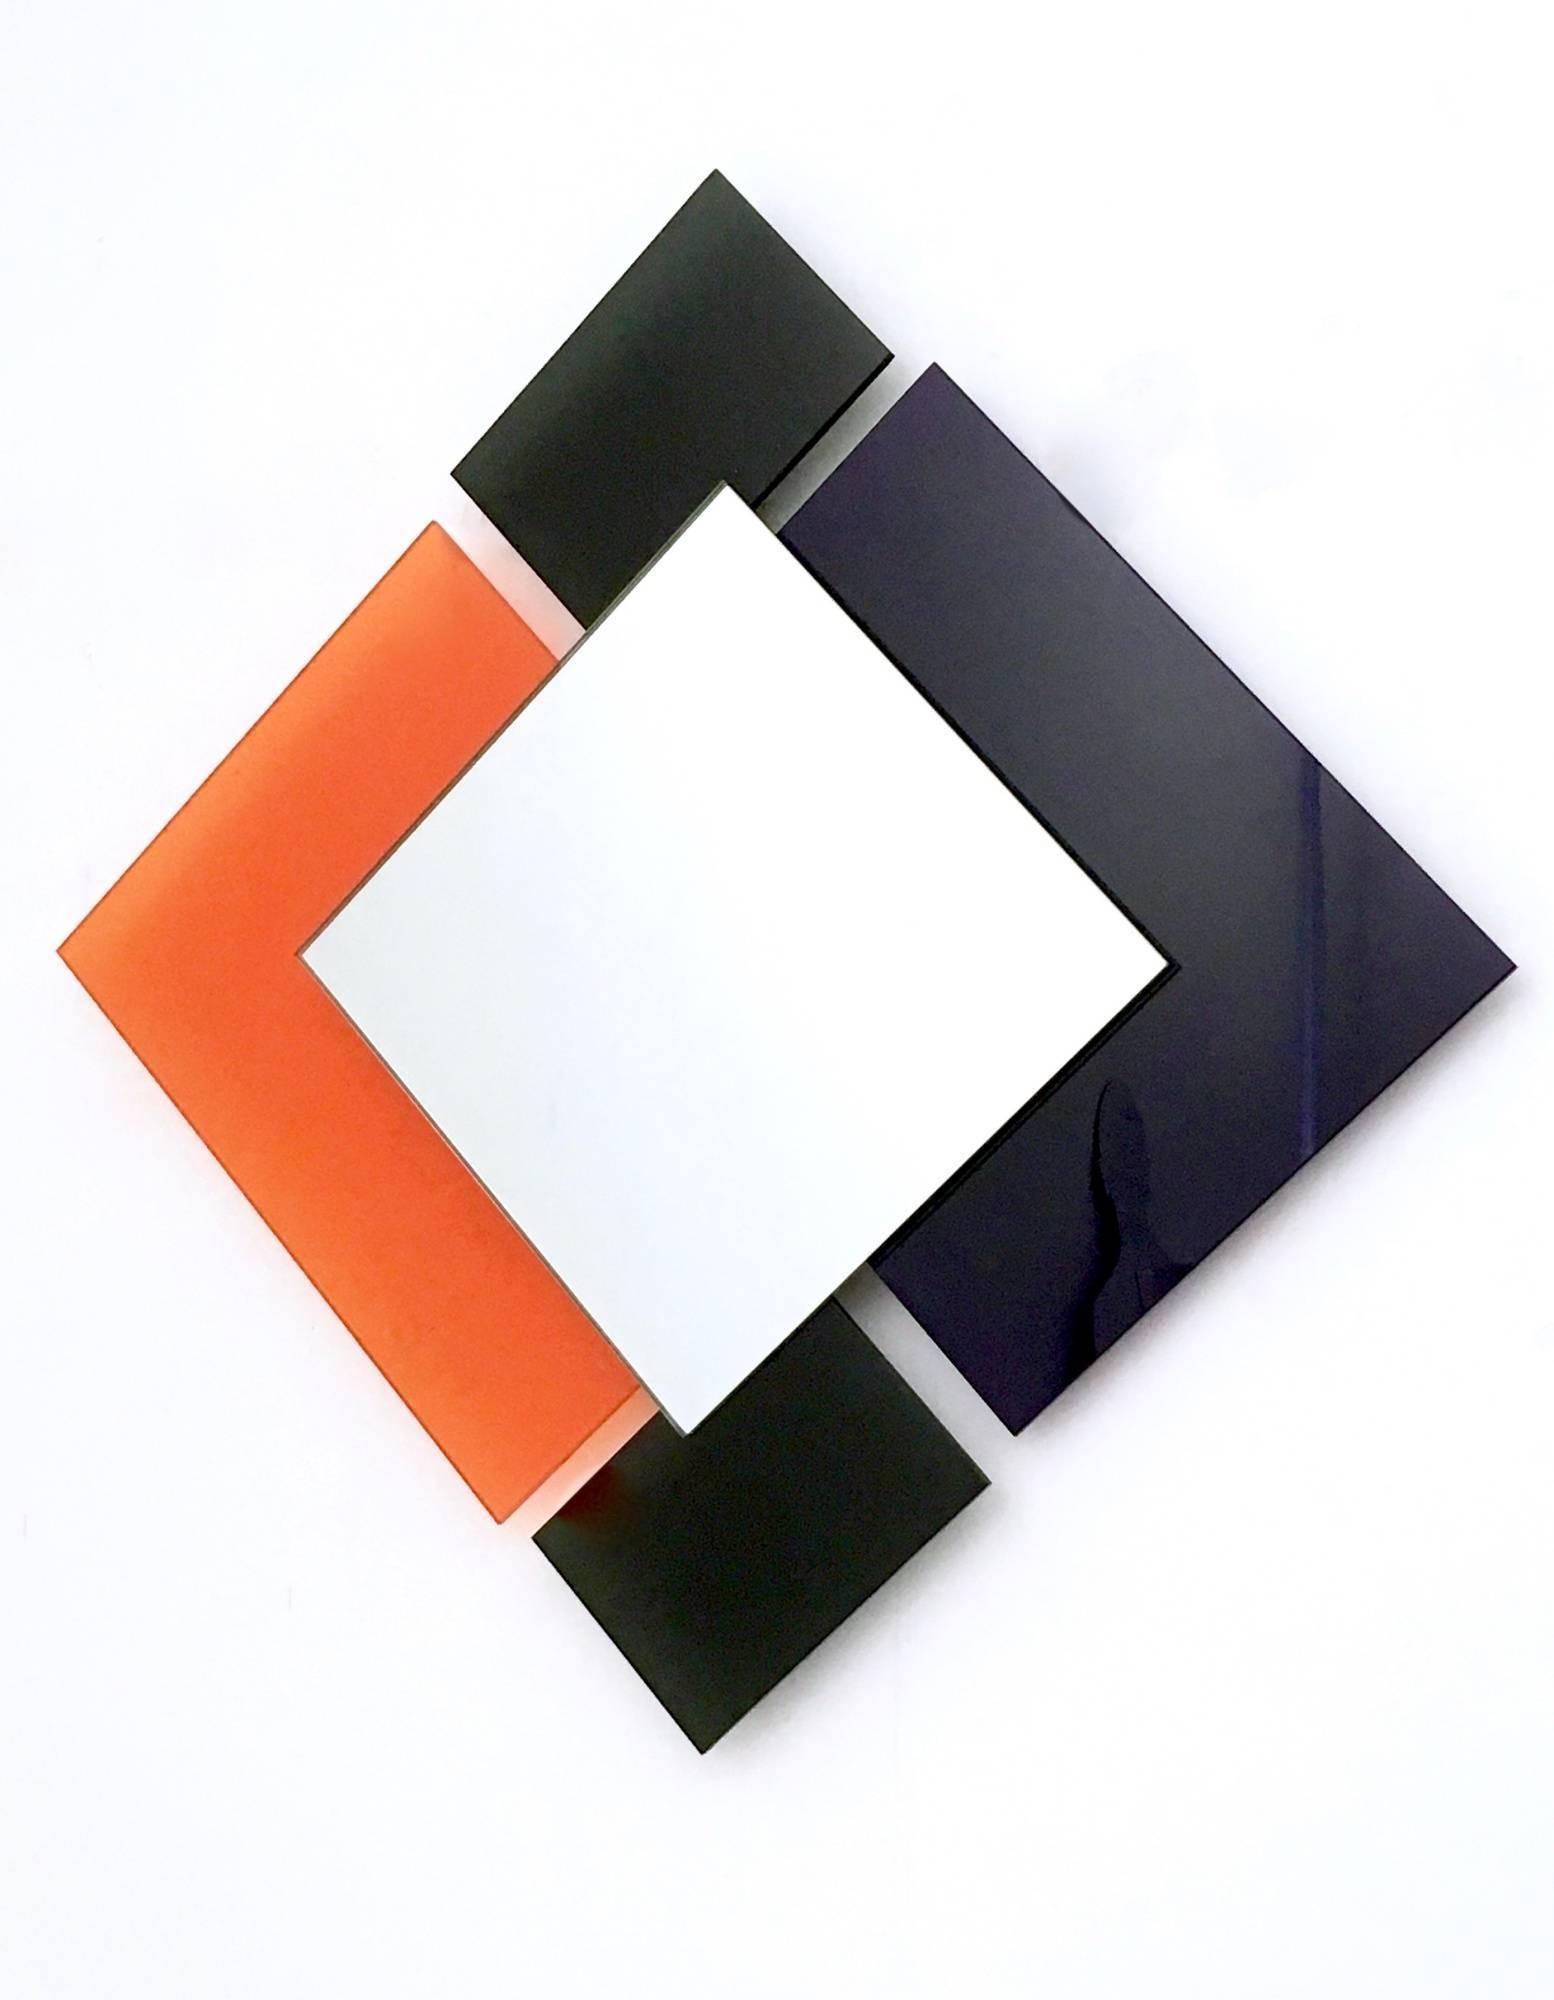 Pair of Postmodern Black and Orange Wall Mirrors in the Style of Sottsass, 1980s For Sale 1